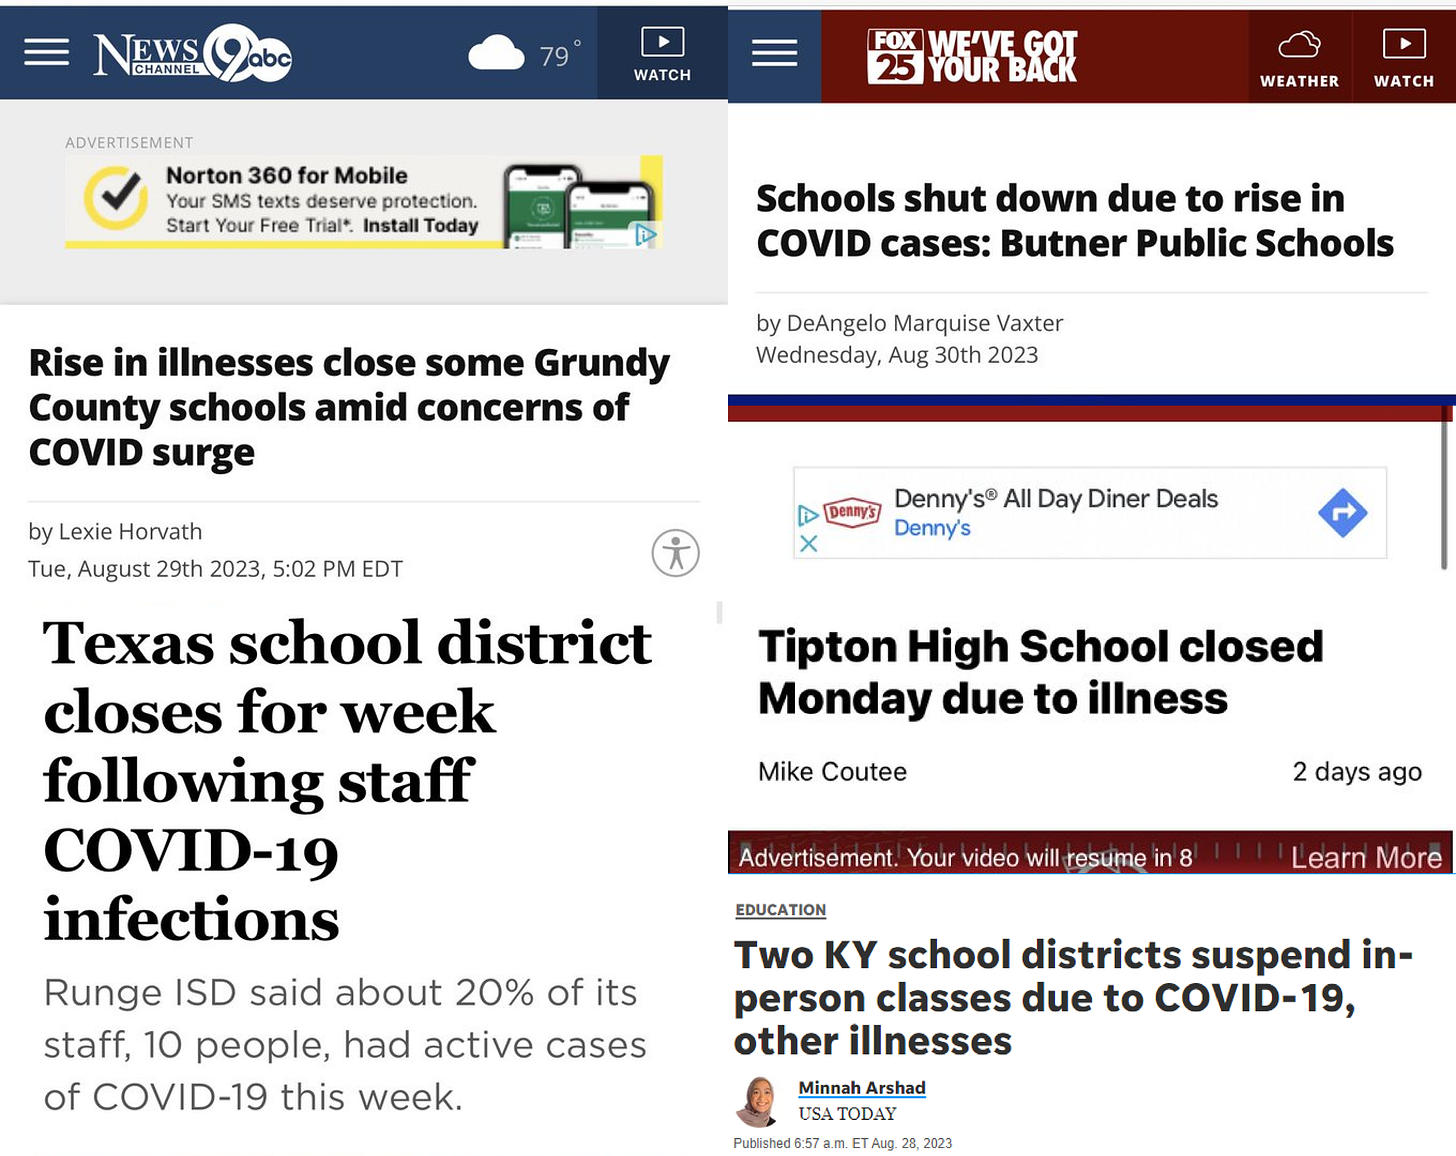 A collection of recent news headlines about how COVID closes schools around the country, mostly in Republican states.